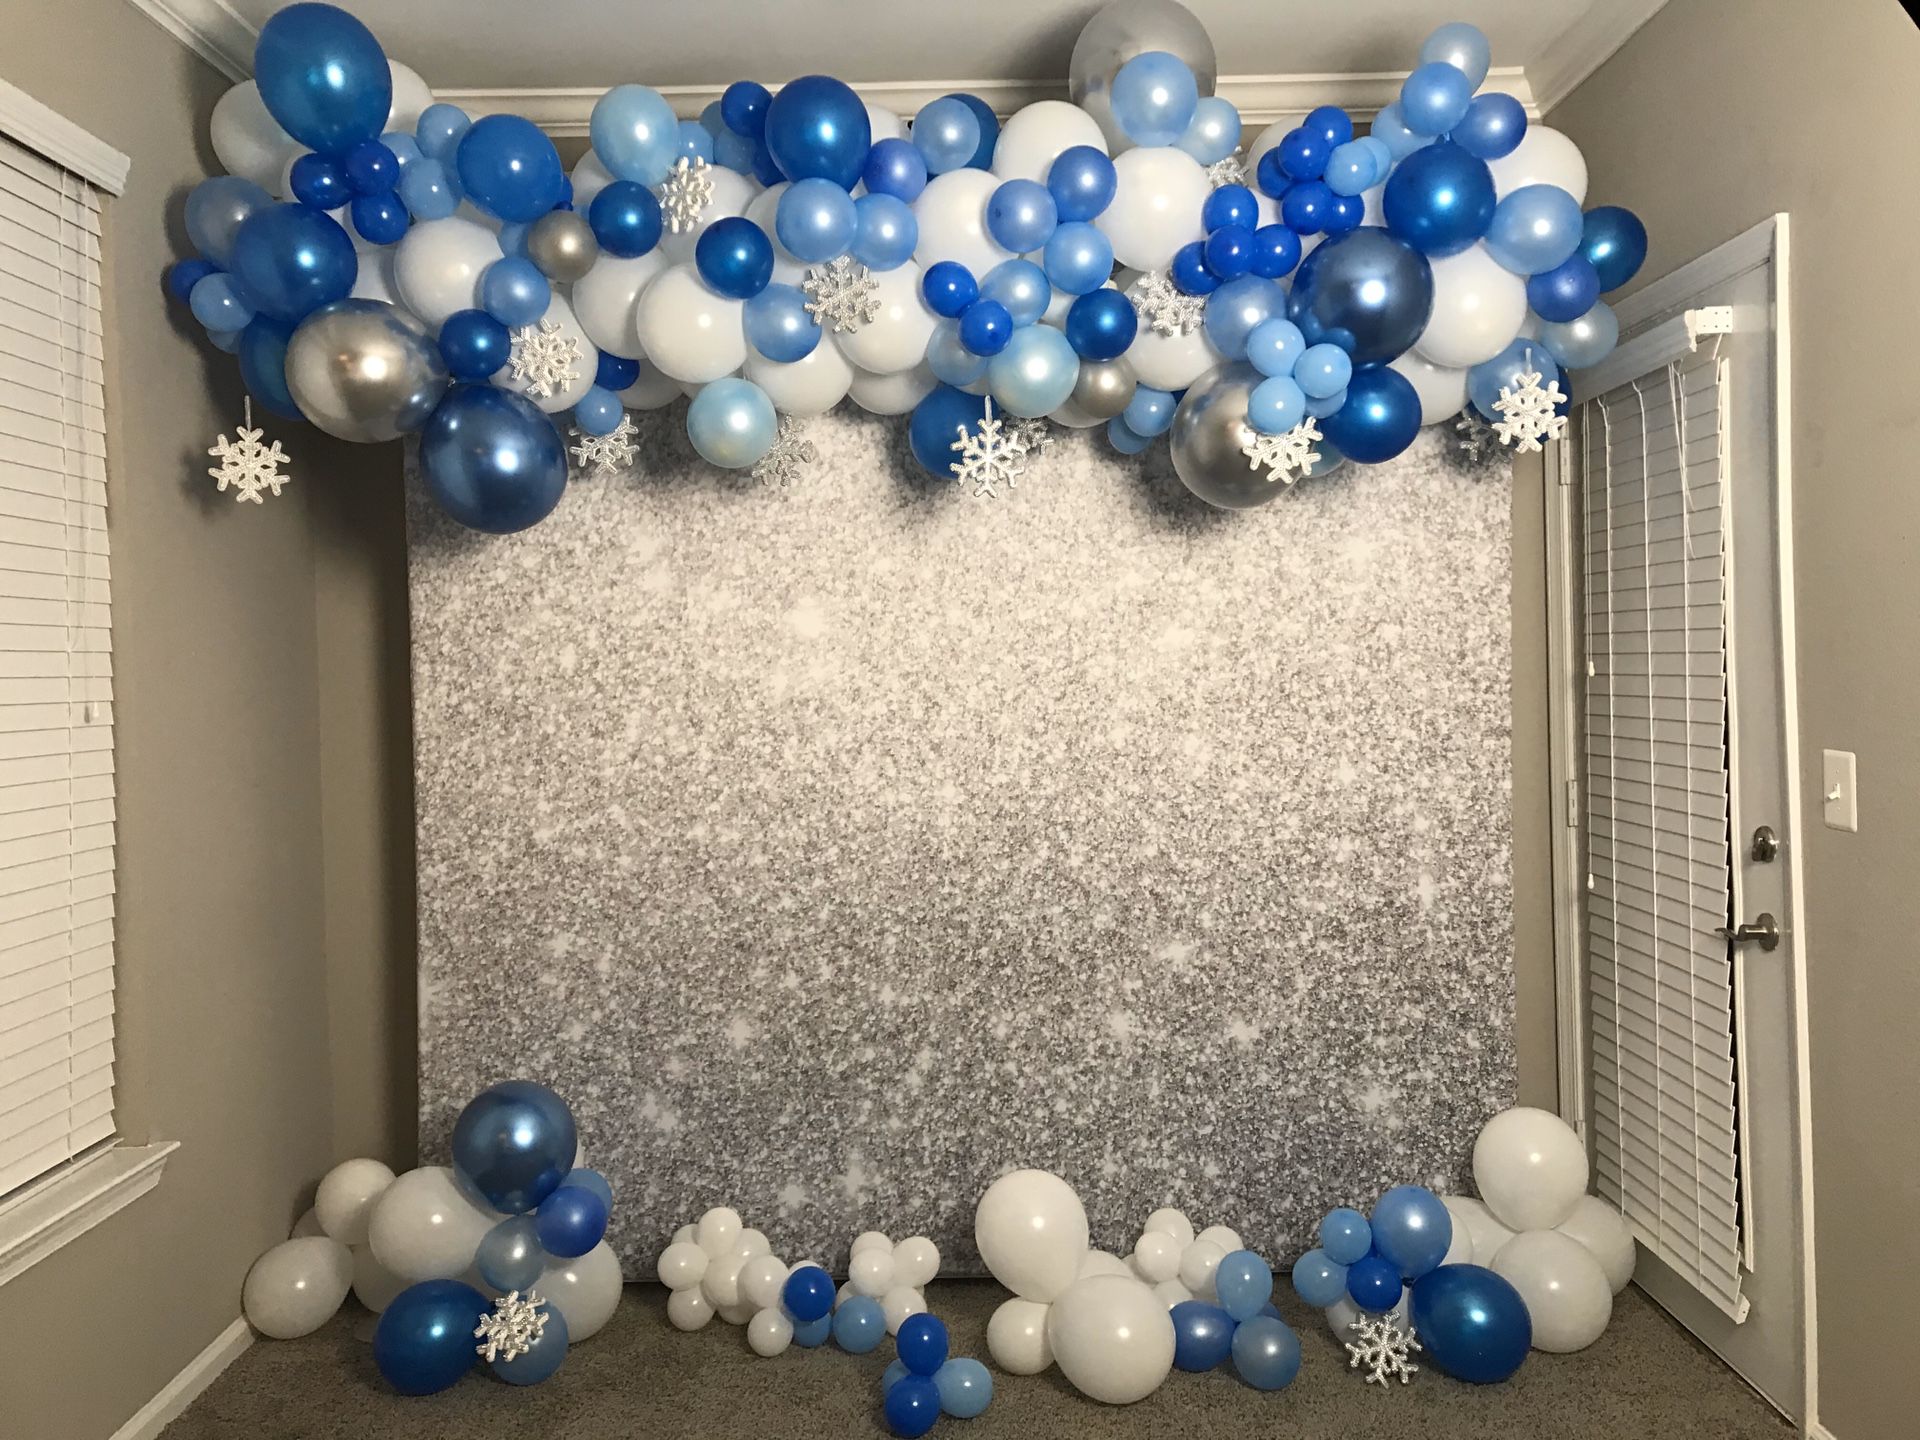 Balloon Decorations for all types of events